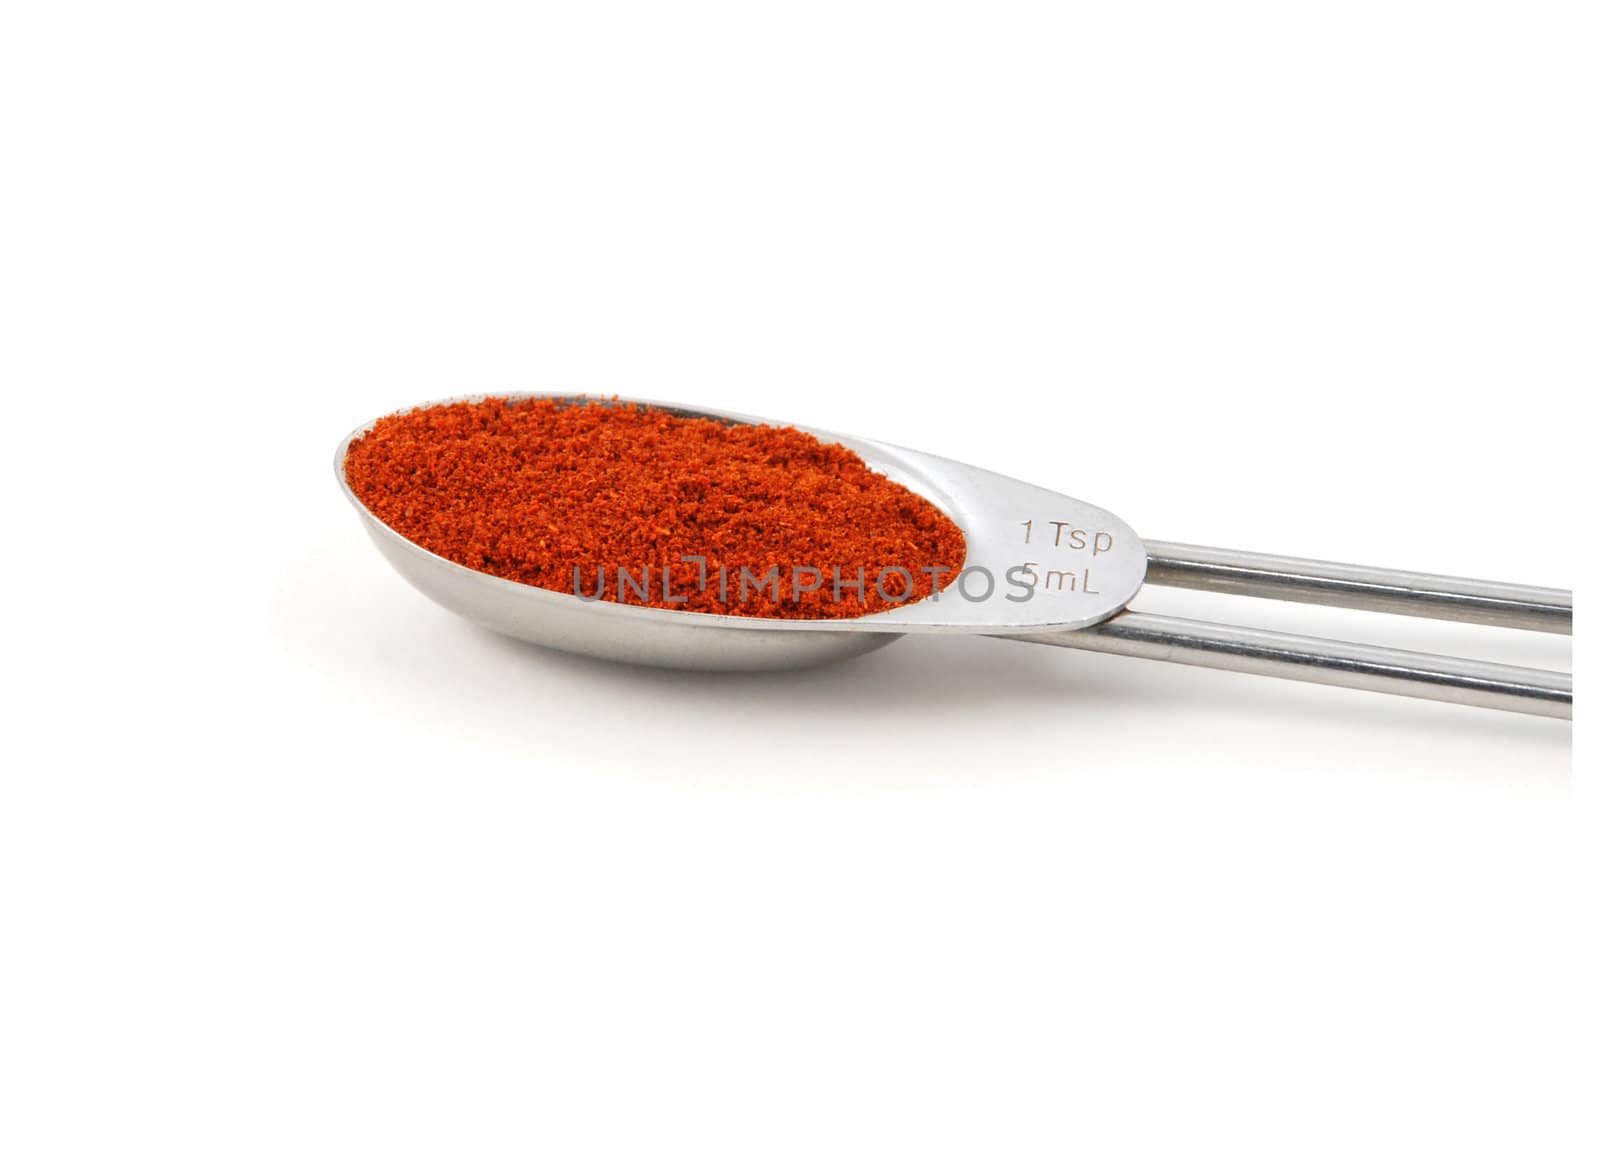 Chilli powder measured in a metal teaspoon, isolated on a white background